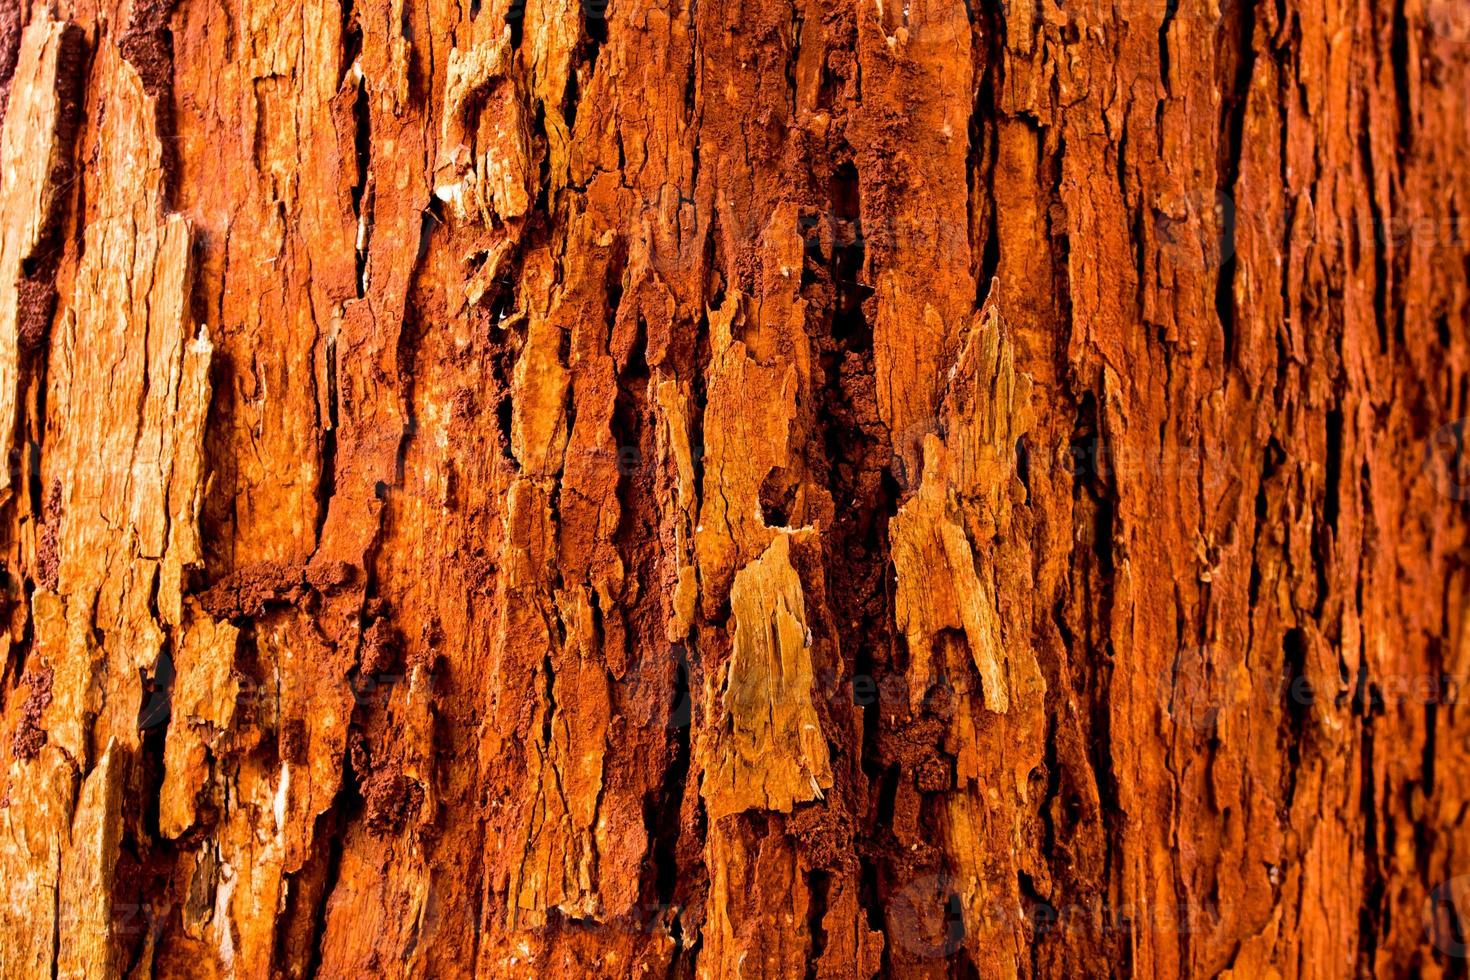 The vivid red trunk of the tree photo